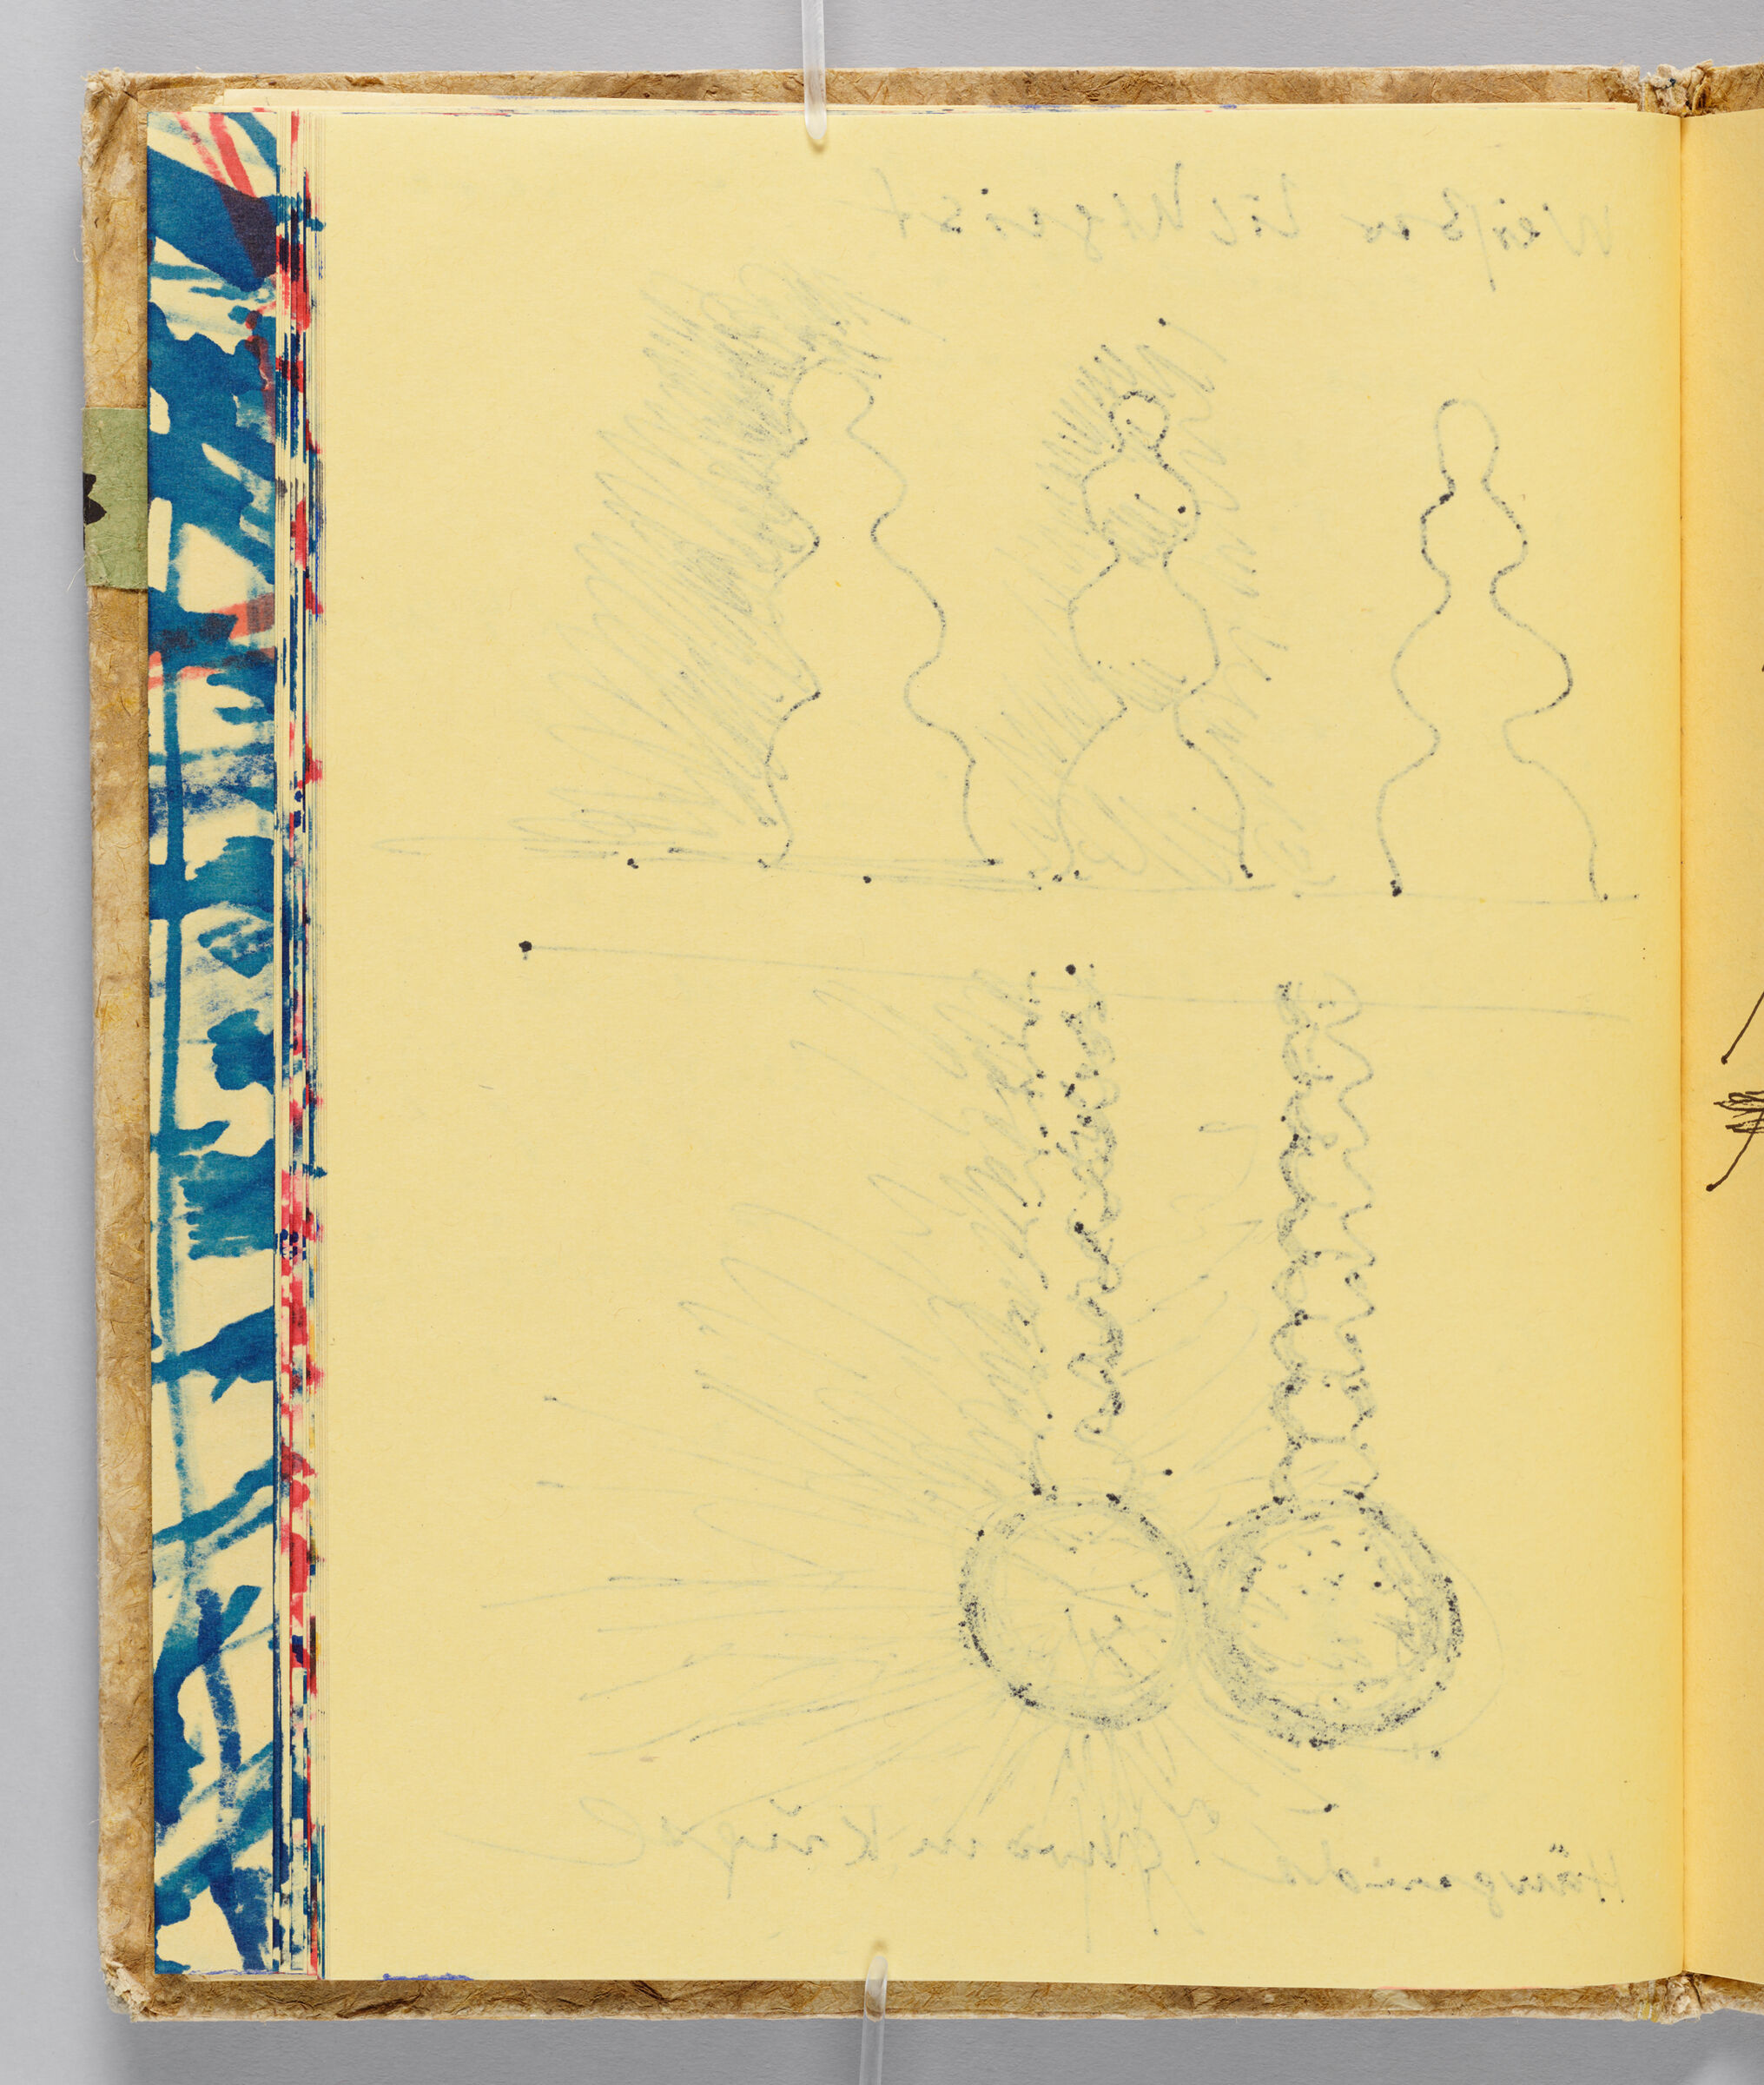 Untitled (Bleed-Through Of Previous Page, Left Page); Untitled (Light Sculpture, Right Page)